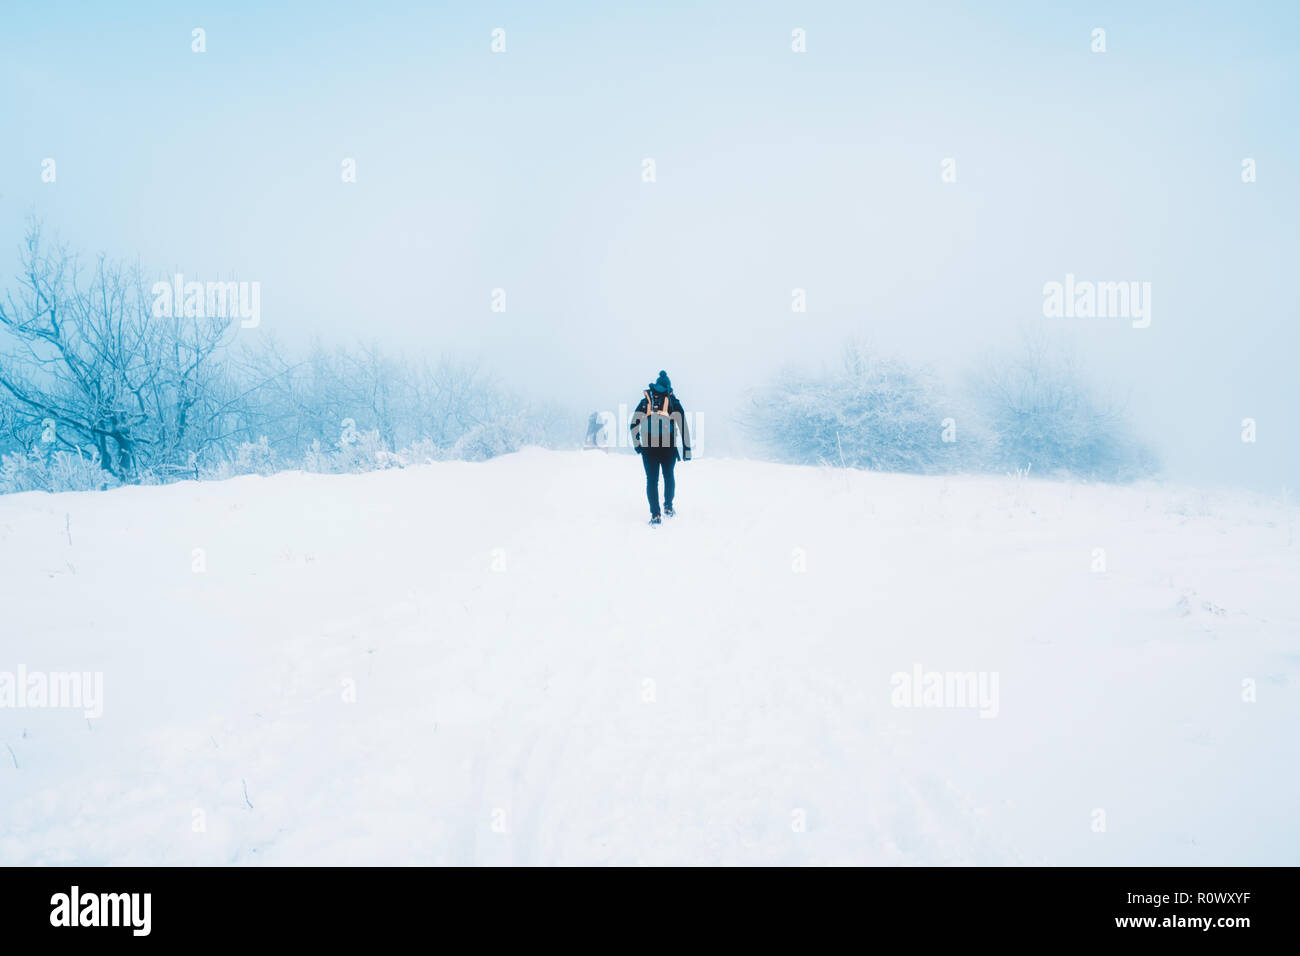 A single backpacker at the top of a snowy mountain. Stock Photo